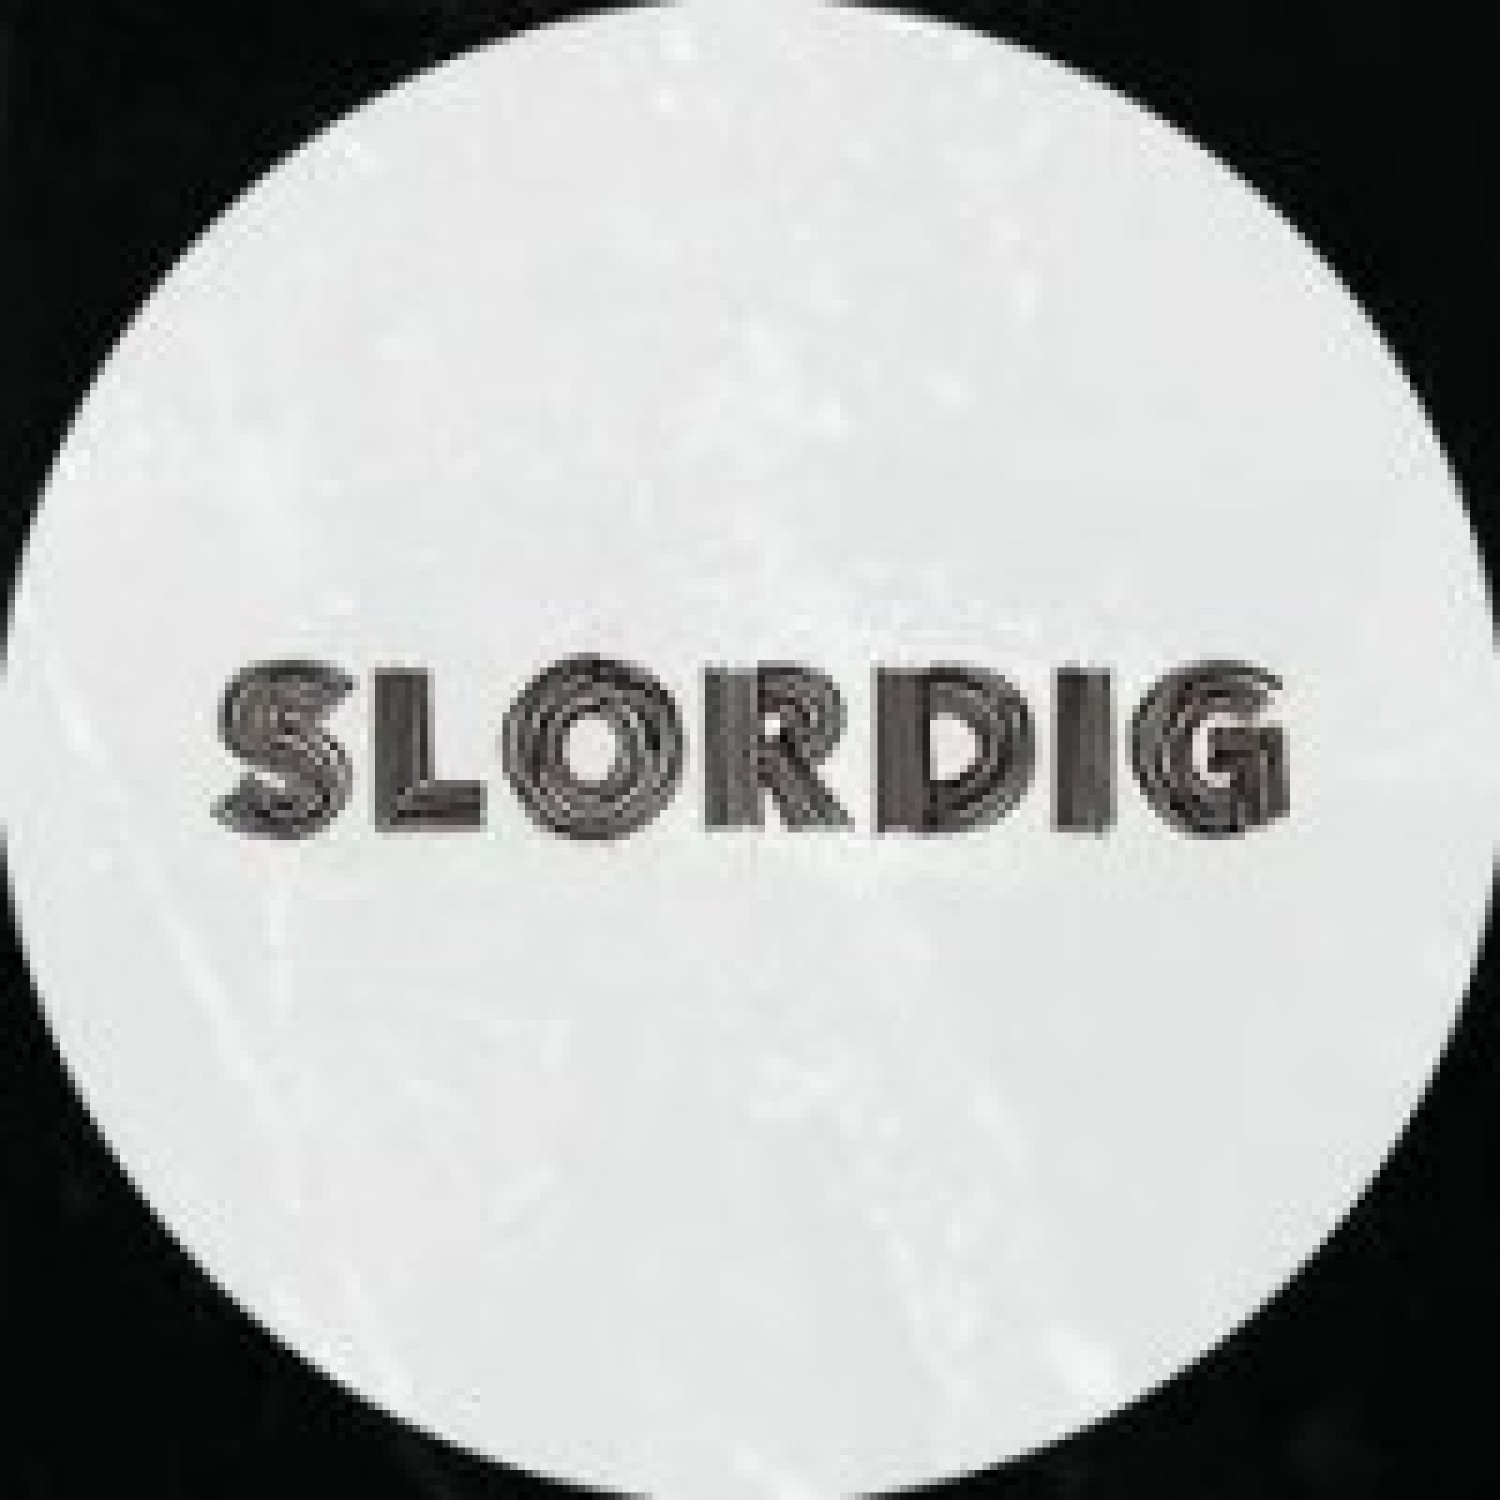 Slordig Events